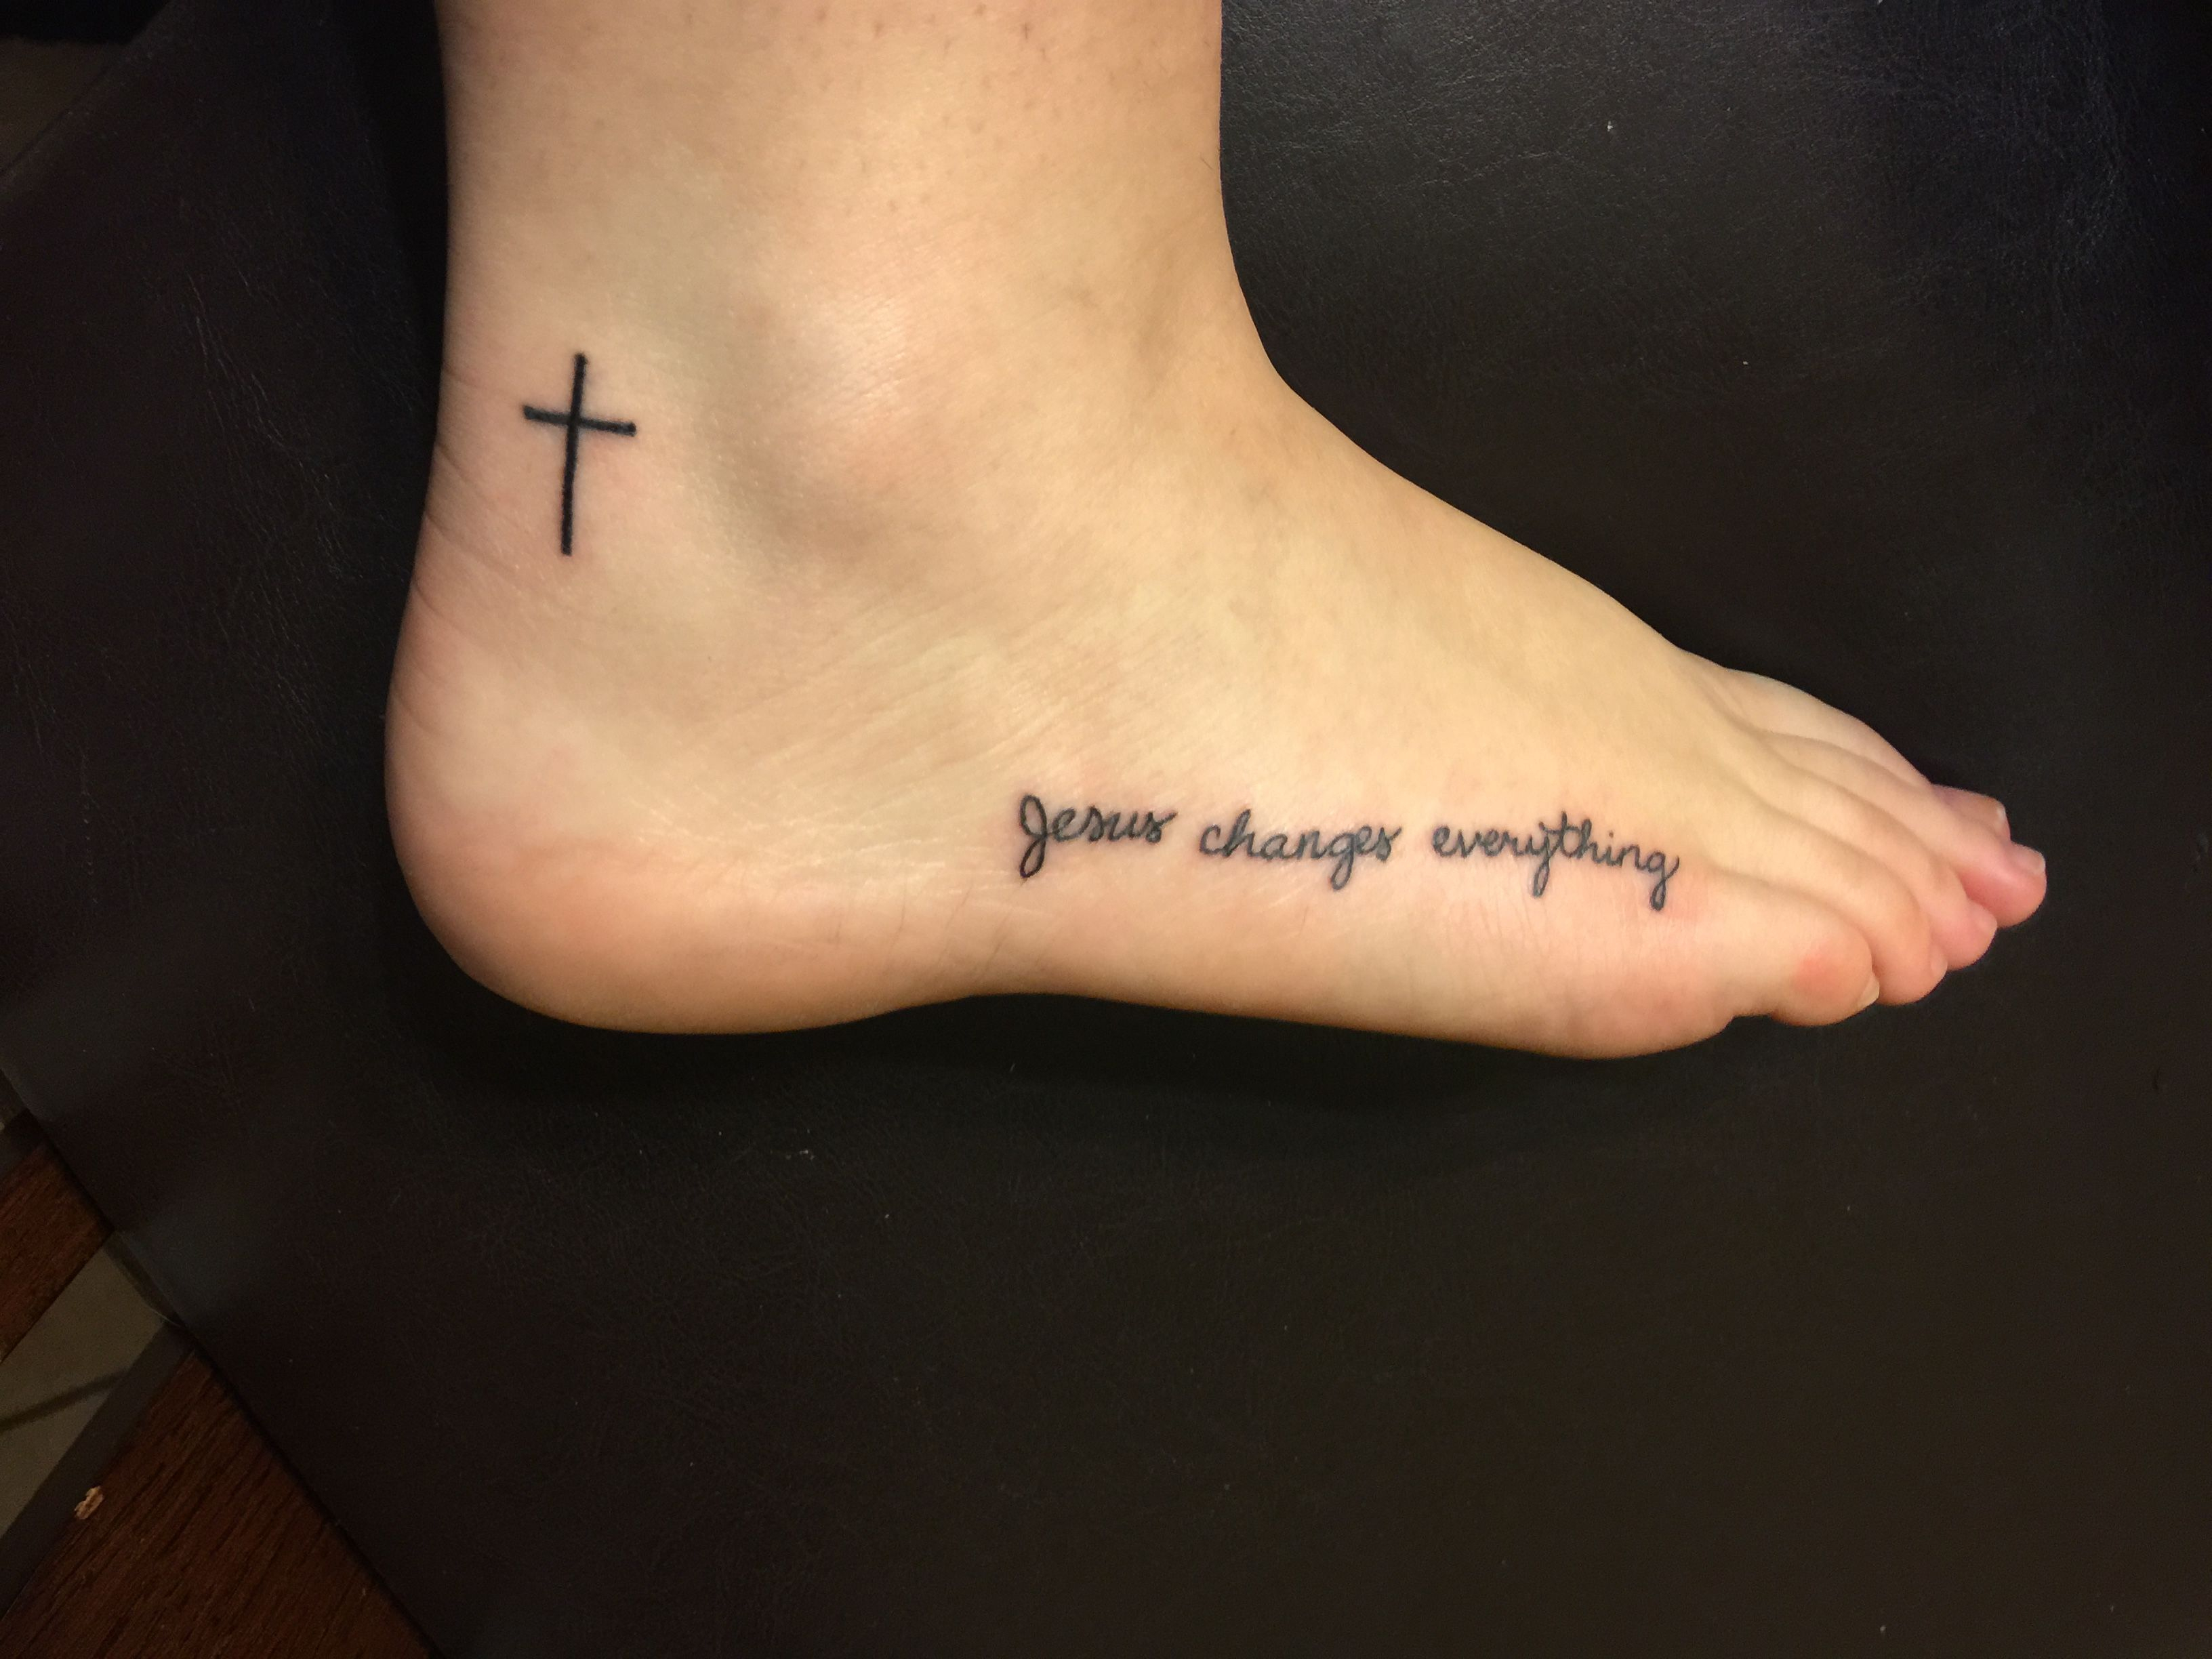 Cross Tattoo And Foot Tattoonow Both My Feet Match Tattoos throughout proportions 3264 X 2448